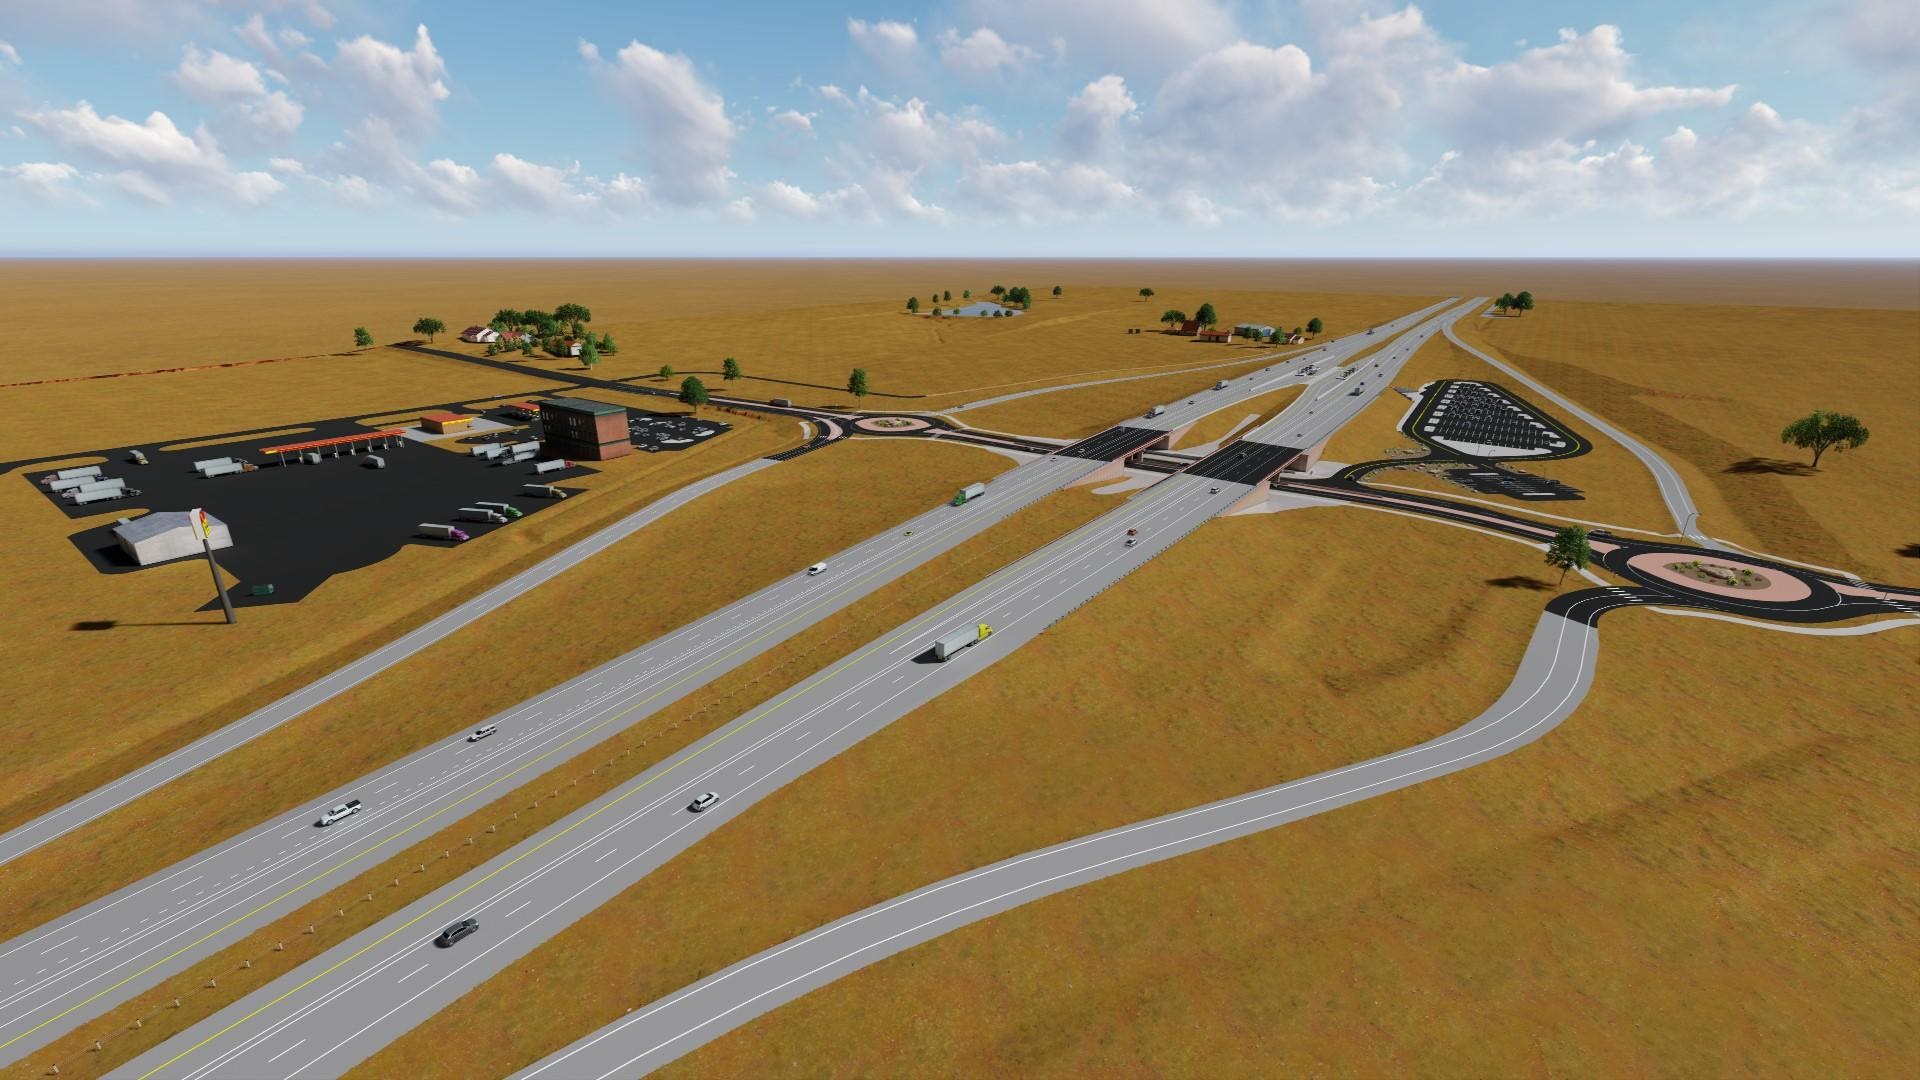 New interchange with the mobility hub to the north toward Cheyenne detail image